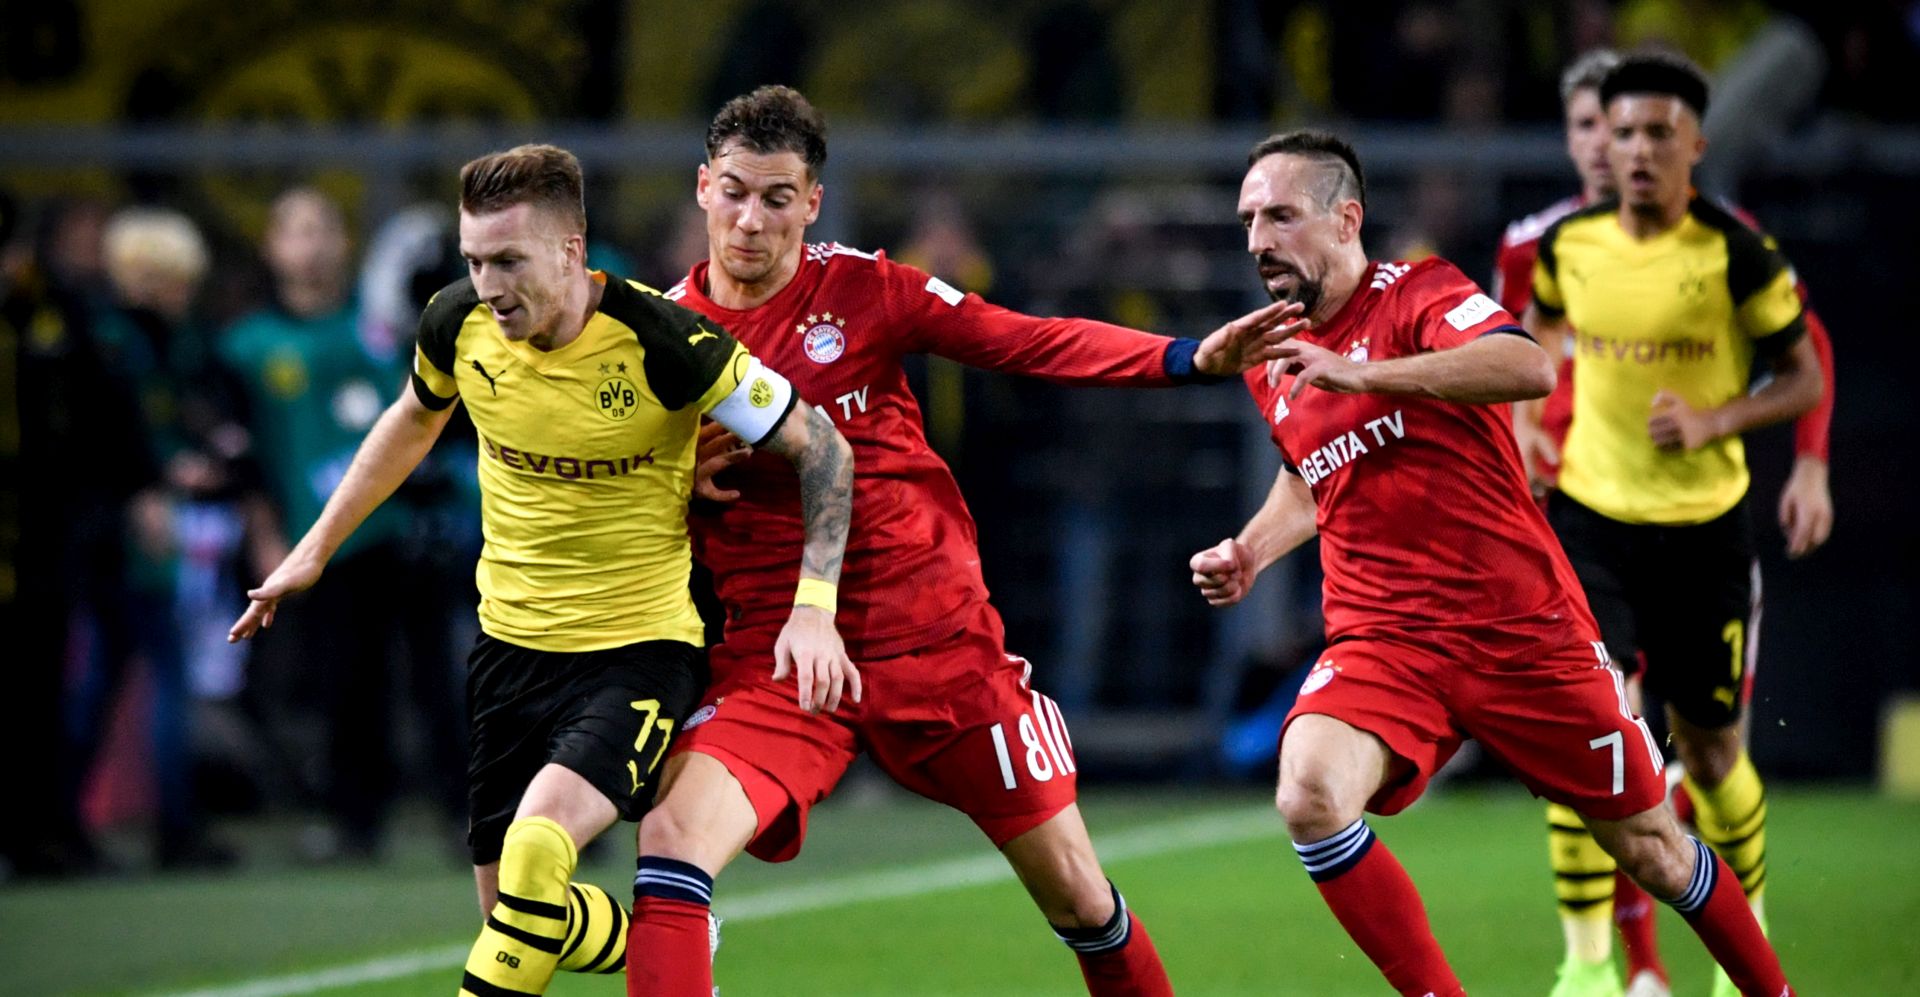 epa07156126 Dortmund's Marco Reus (L) in action against Bayern players Franck Ribery (R) and Leon Goretzka (C) during the German Bundesliga soccer match between Borussia Dortmund and FC Bayern Muenchen in Dortmund, Germany, 10 November 2018.  EPA/SASCHA STEINBACH CONDITIONS - ATTENTION: The DFL regulations prohibit any use of photographs as image sequences and/or quasi-video.